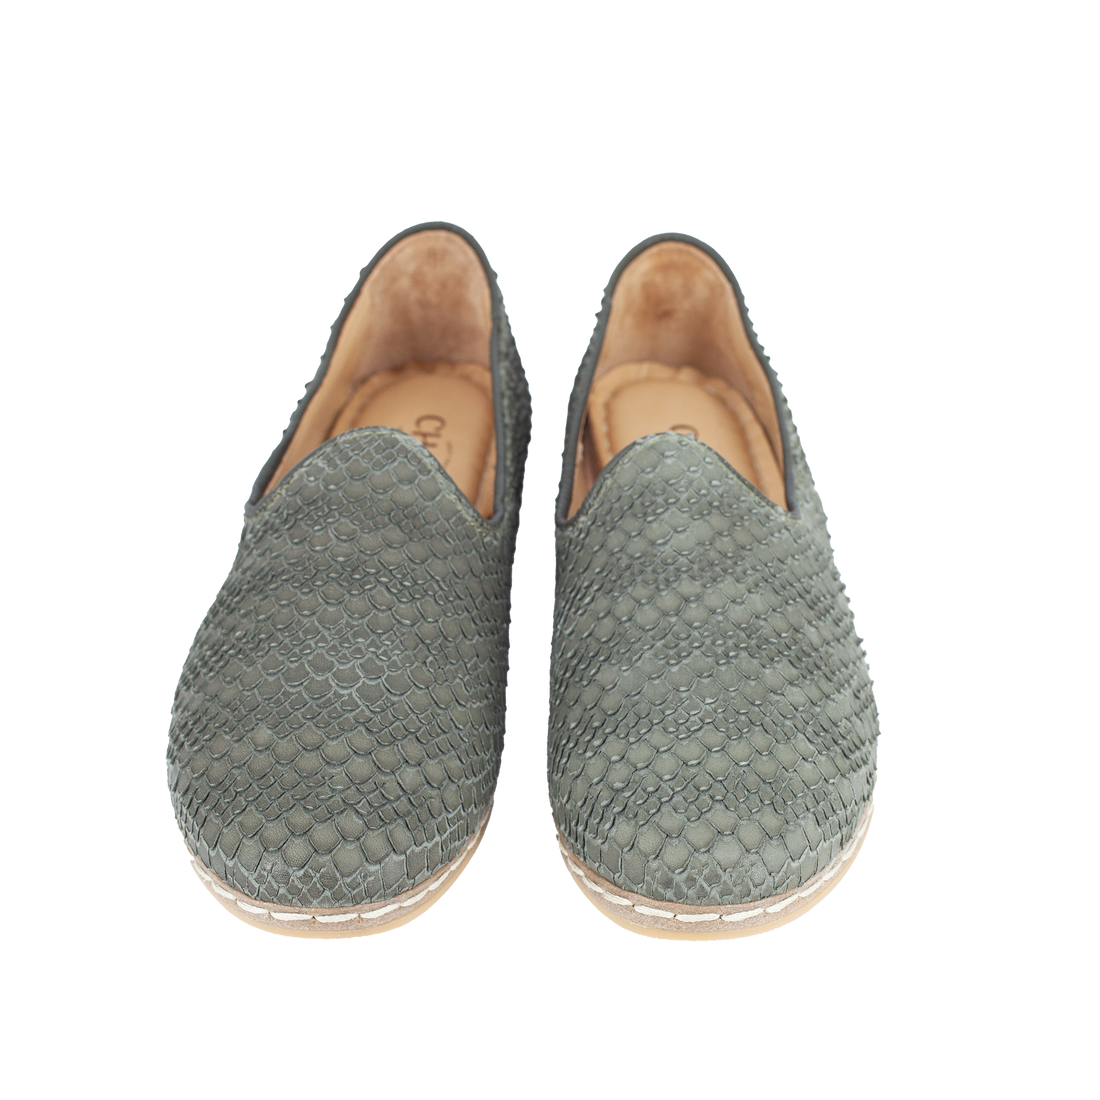 Charix Shoes | Slip On Shoes, Socks and Mules for Men & Women